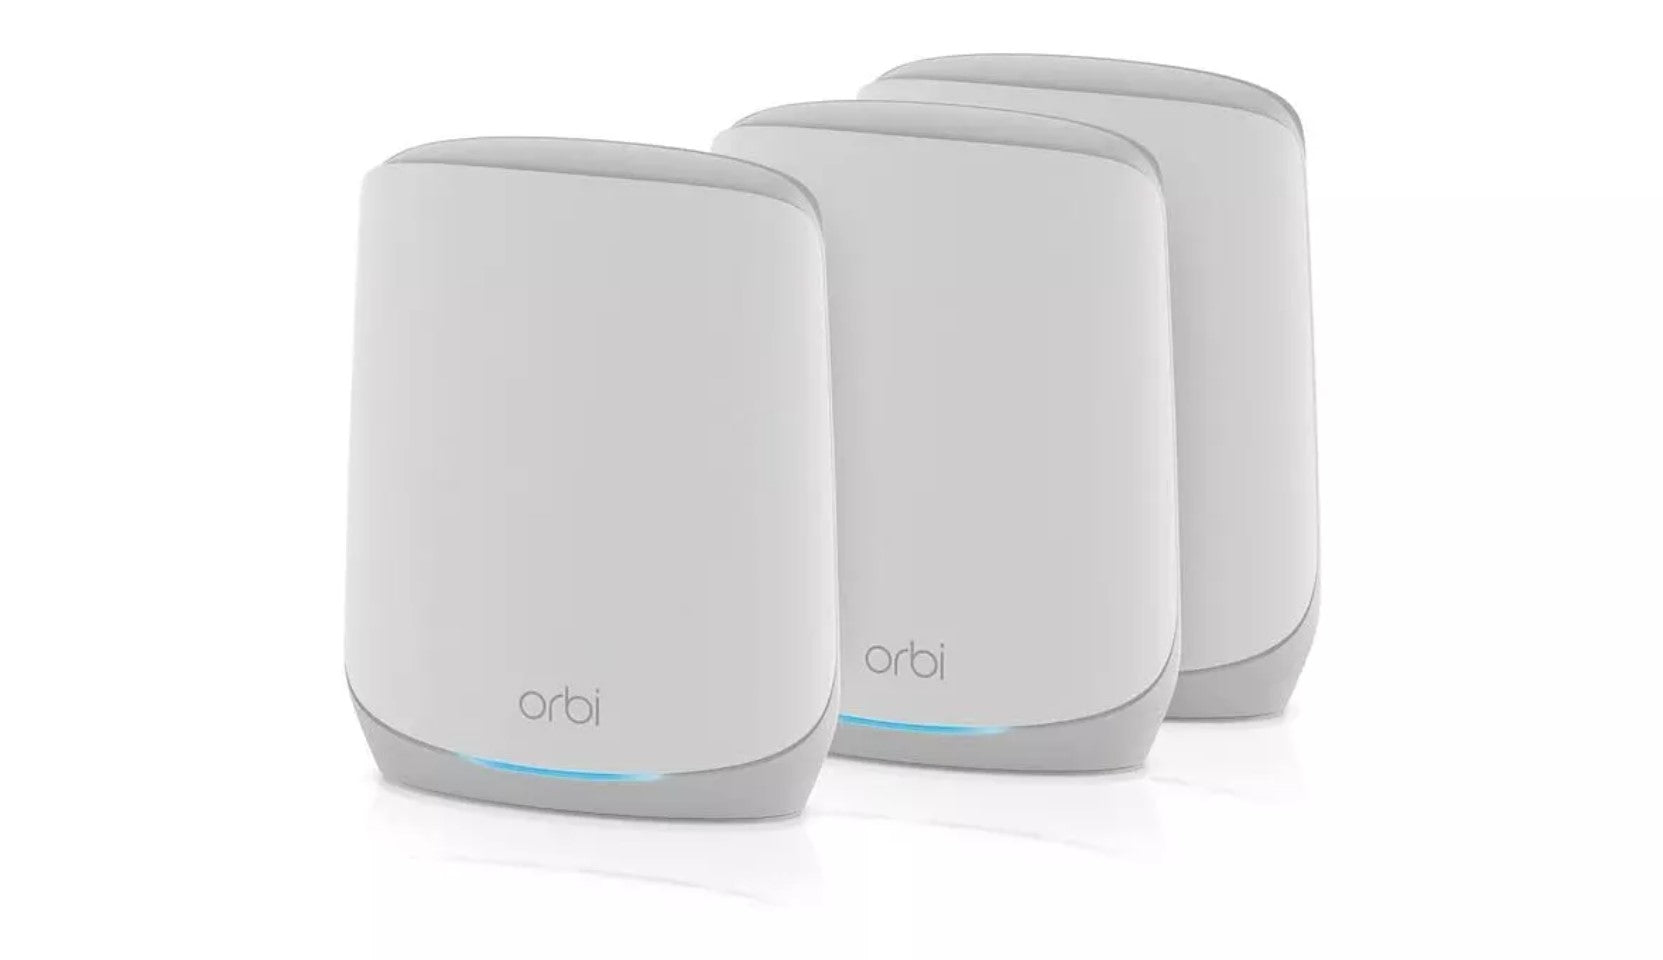 Netgear Orbi RBK763-100NAR AX5400 Tri-band WiFi 6 Mesh System, 5.4Gbps, Router + 2 Satellites - Certified Refurbished